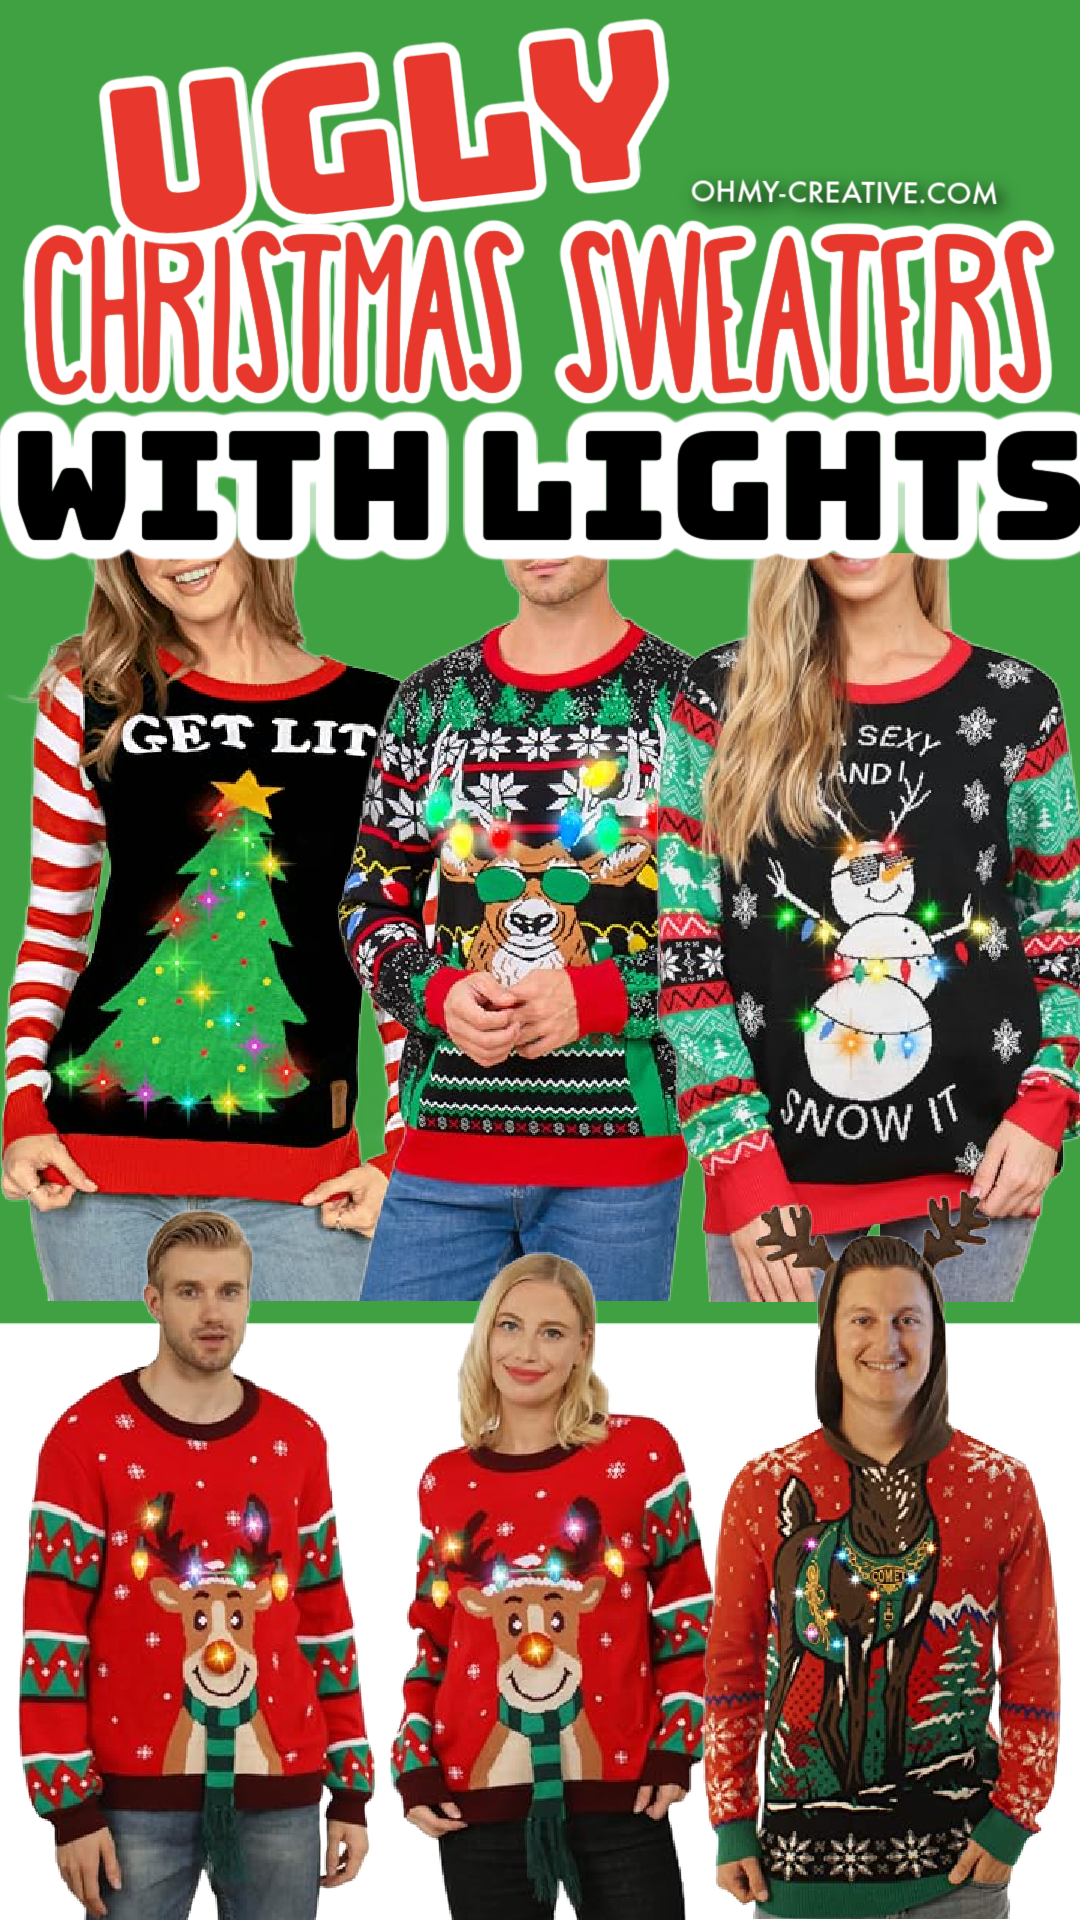 20 Ugly Christmas Sweater With Lights